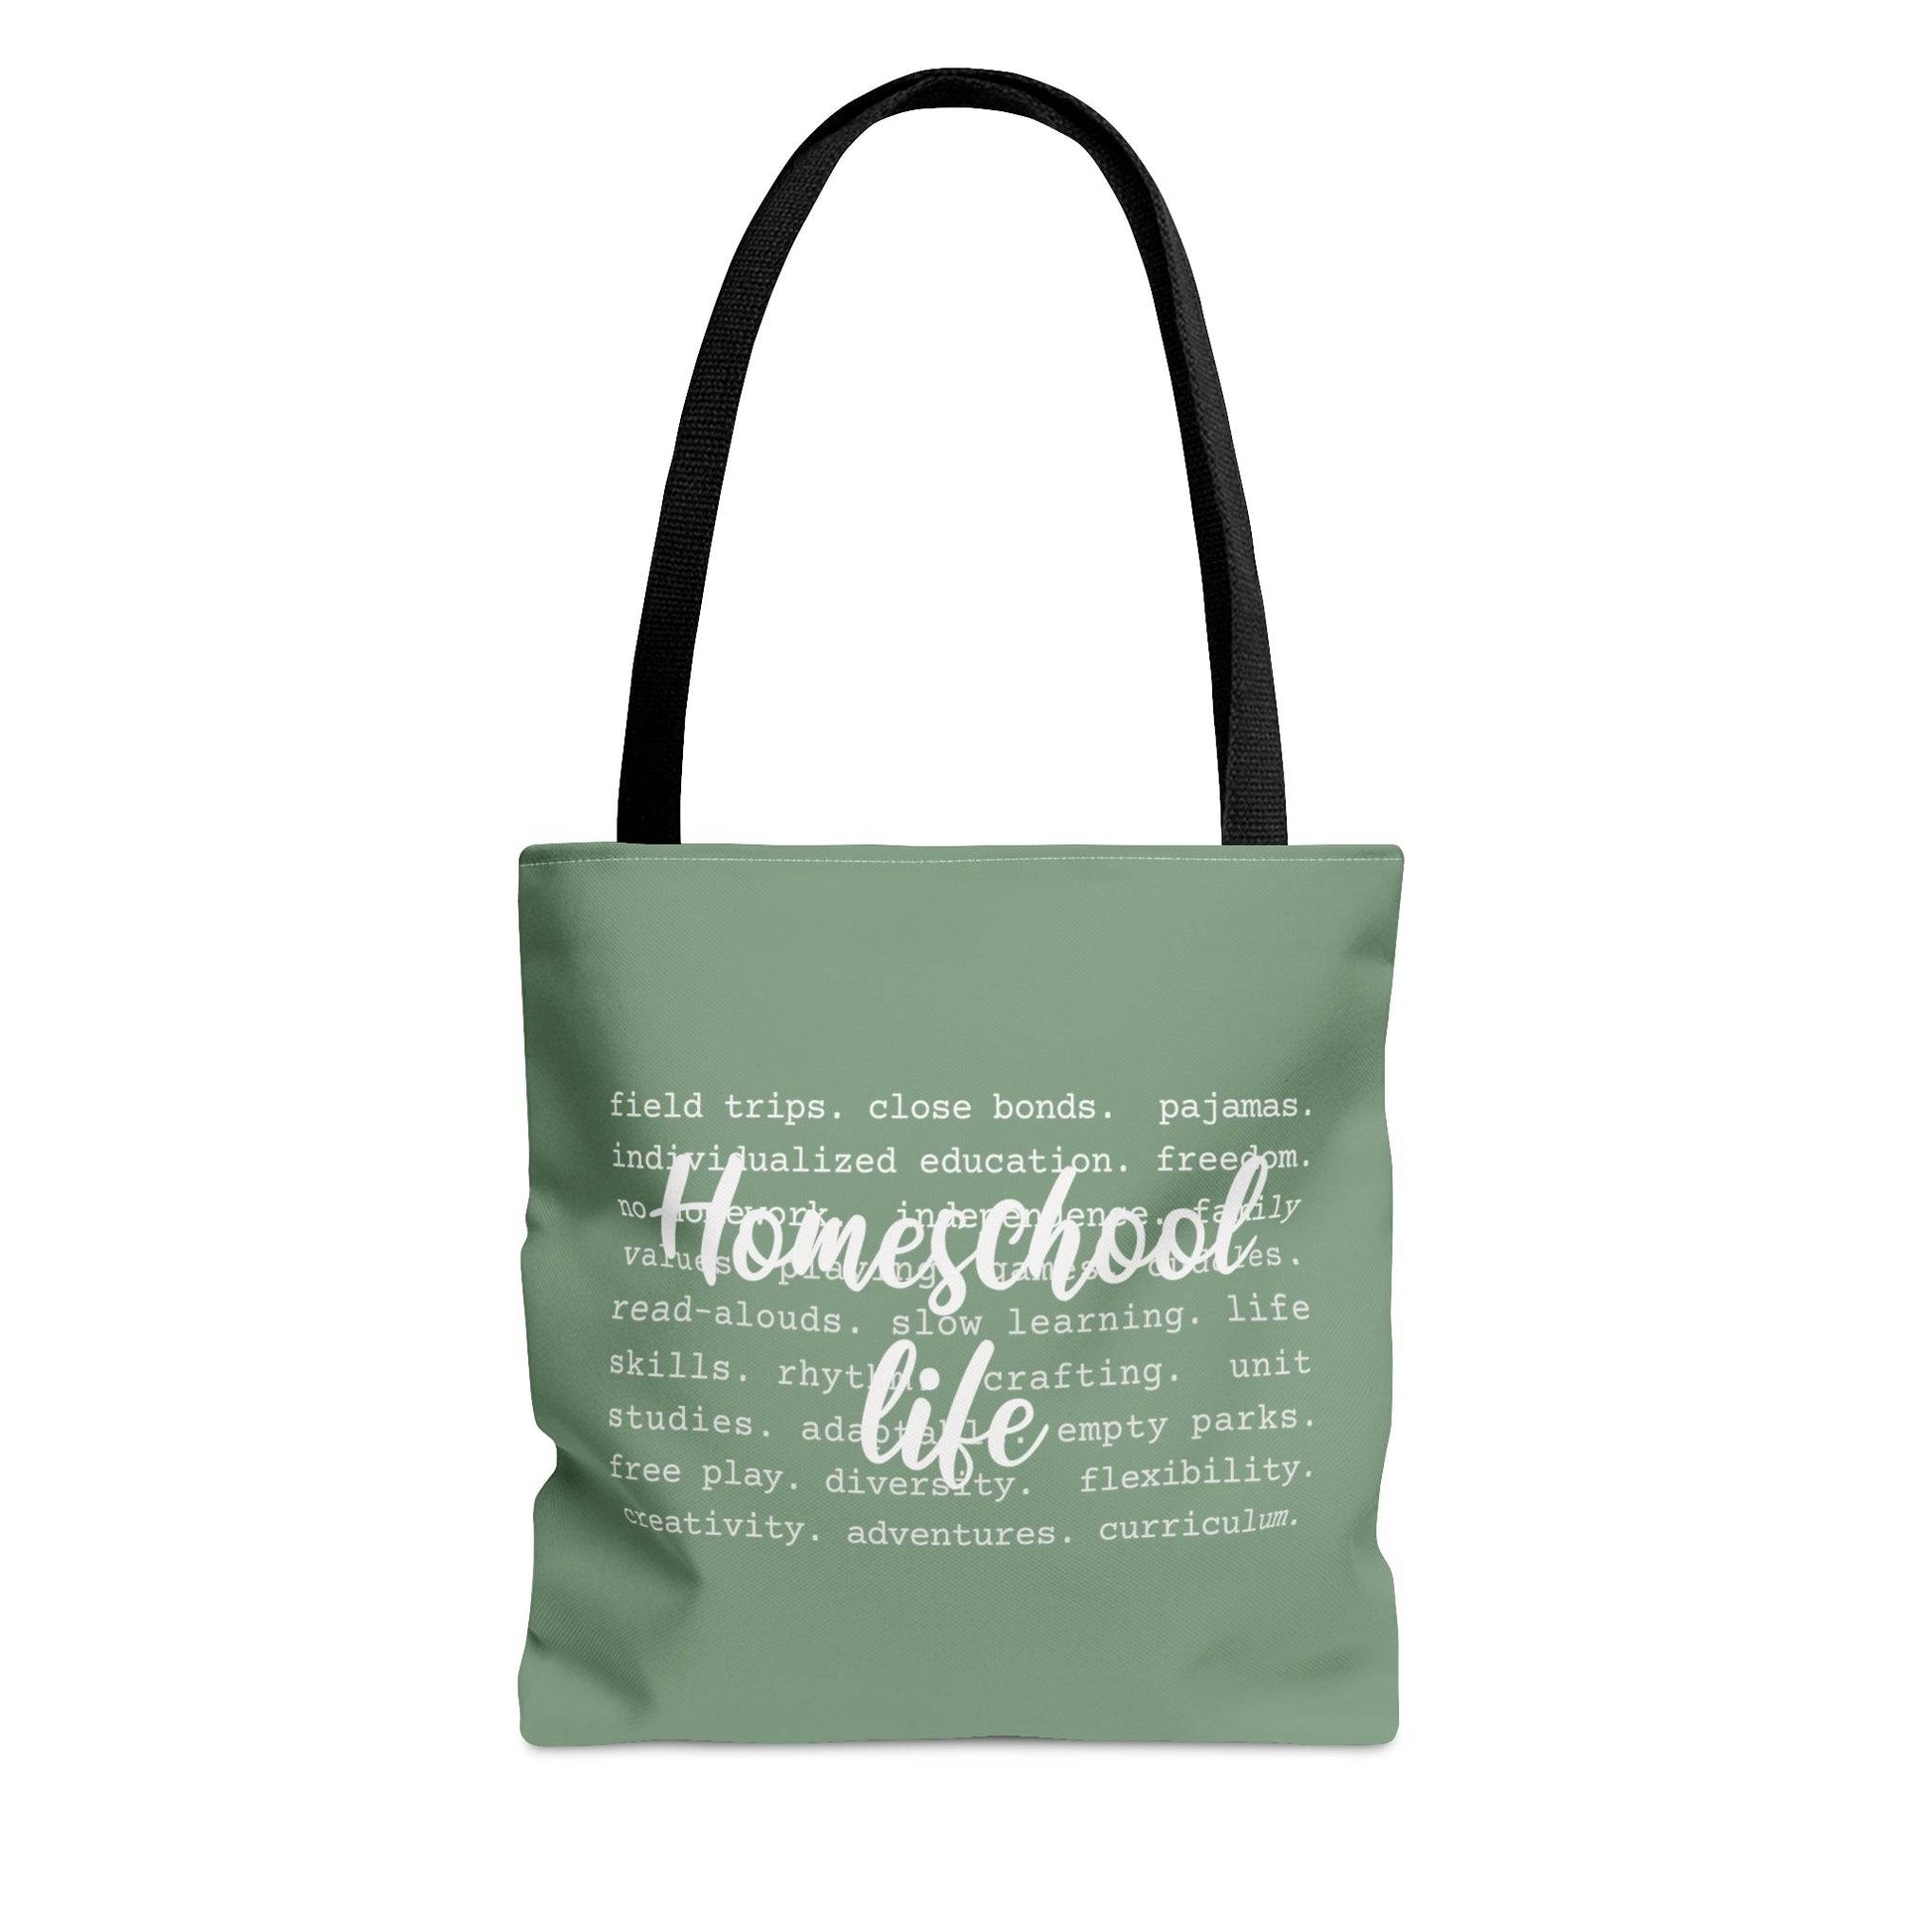 Homeschool Life Tote Bag in Sage for Travel Trips and Co-ops